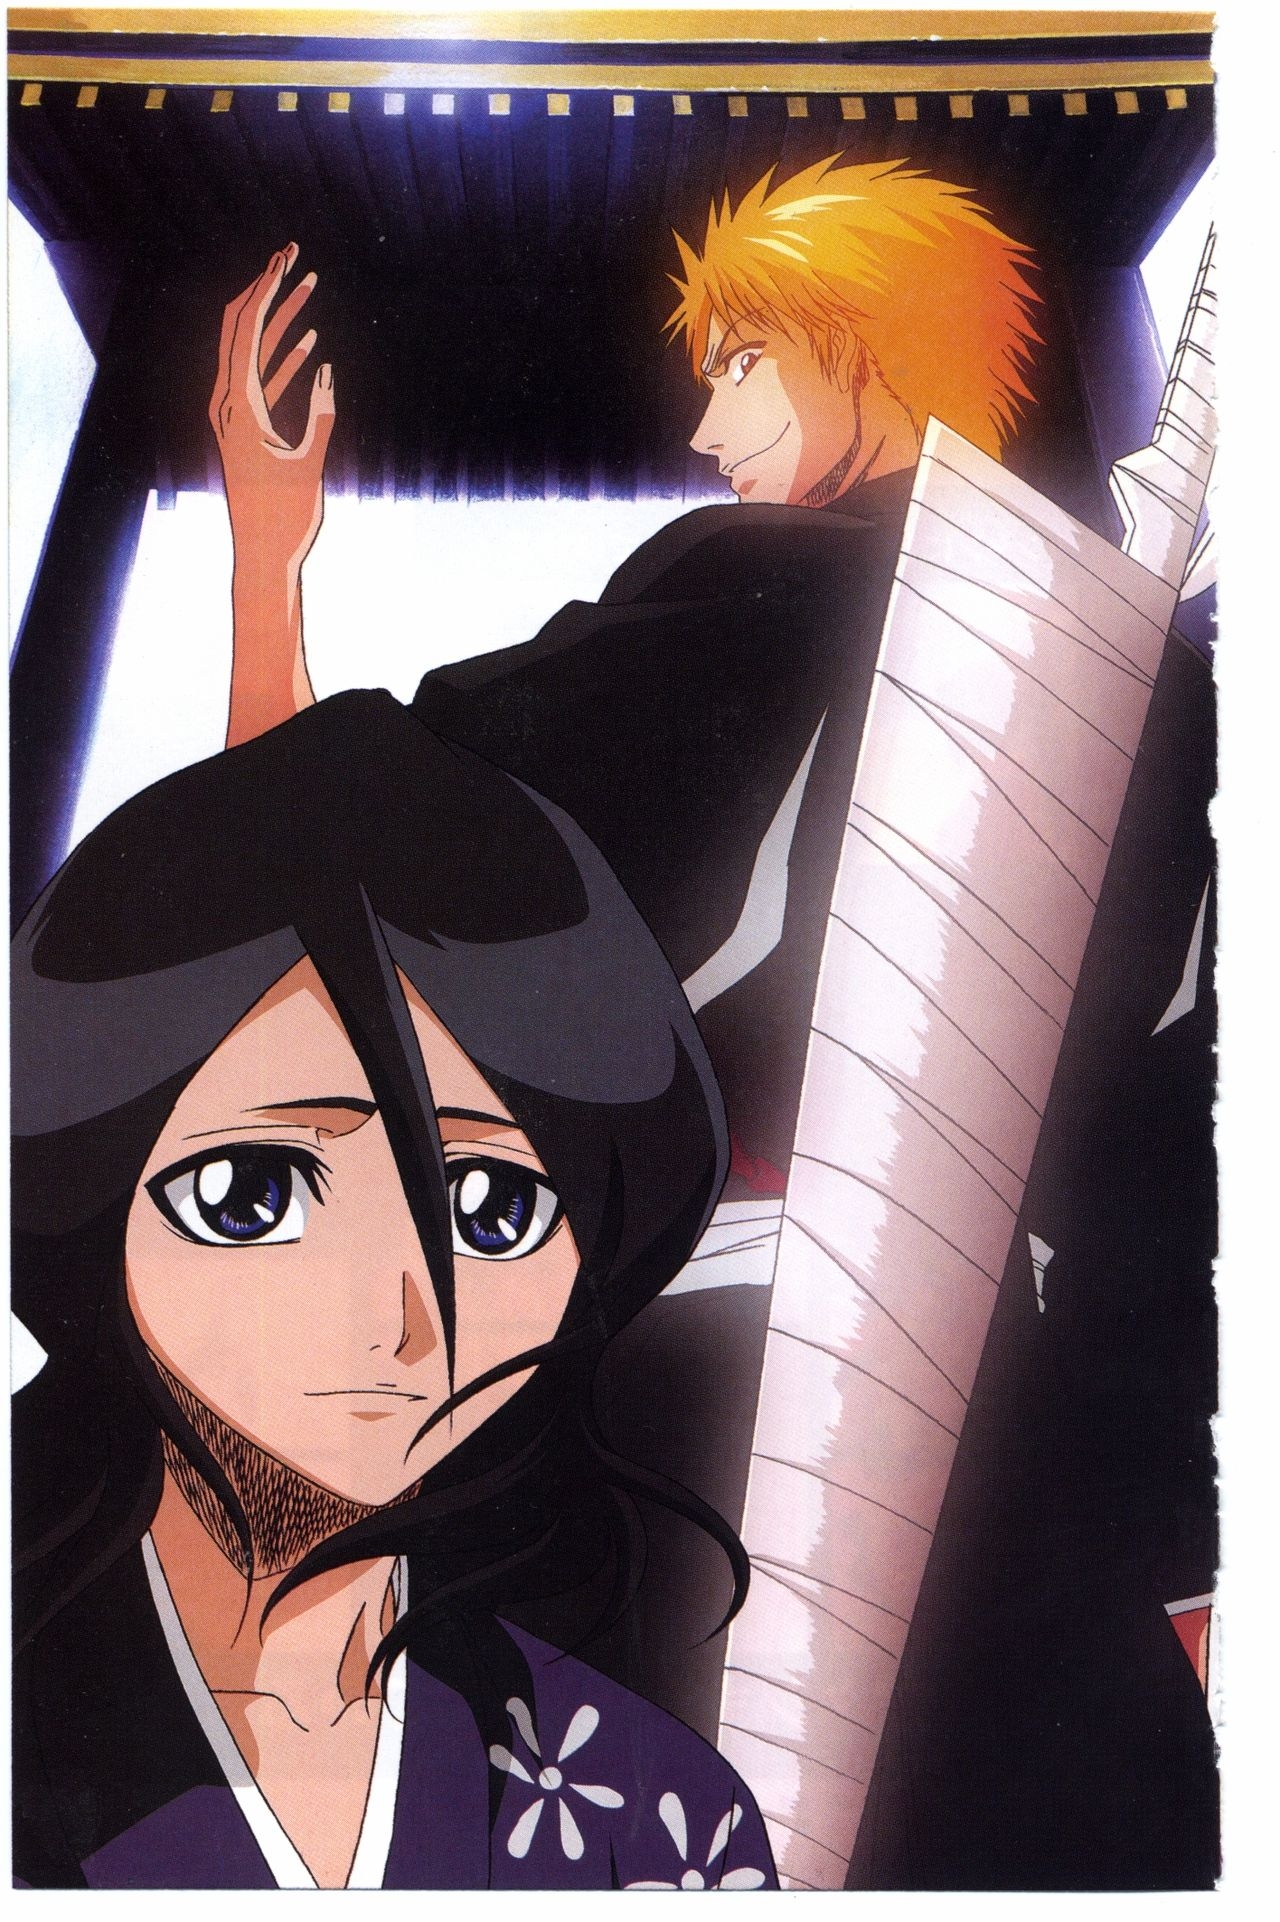 Bleach: Official Animation Book VIBEs 185